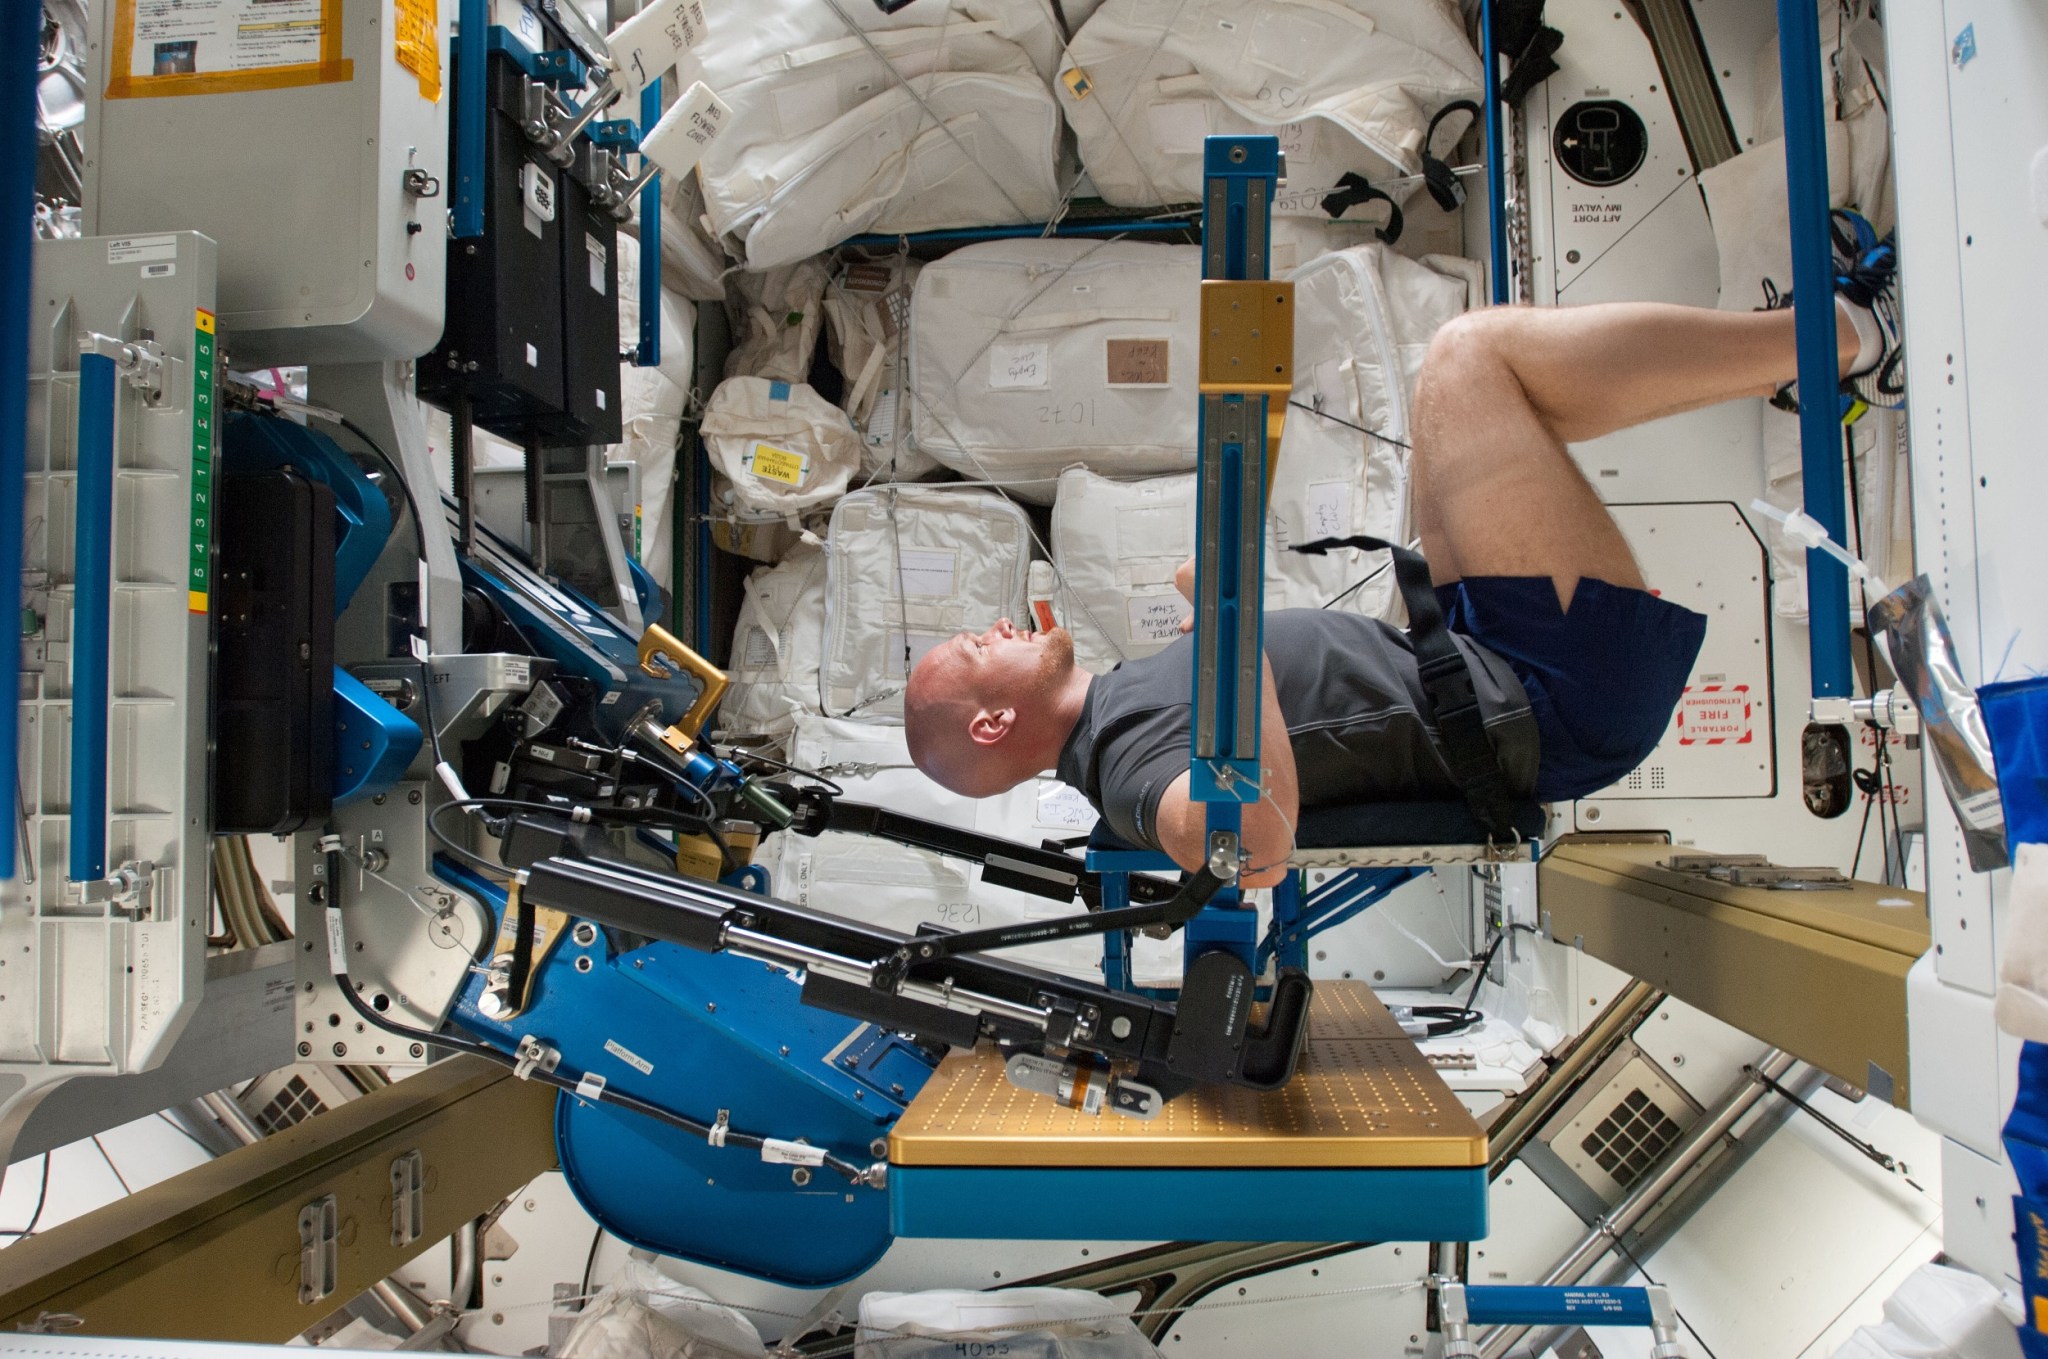 ESA astronaut Alexander Gerst in a squat position while working out on the ARED, with his arms against a beam. His body is facing to the right and his head turned to smile at the camera.